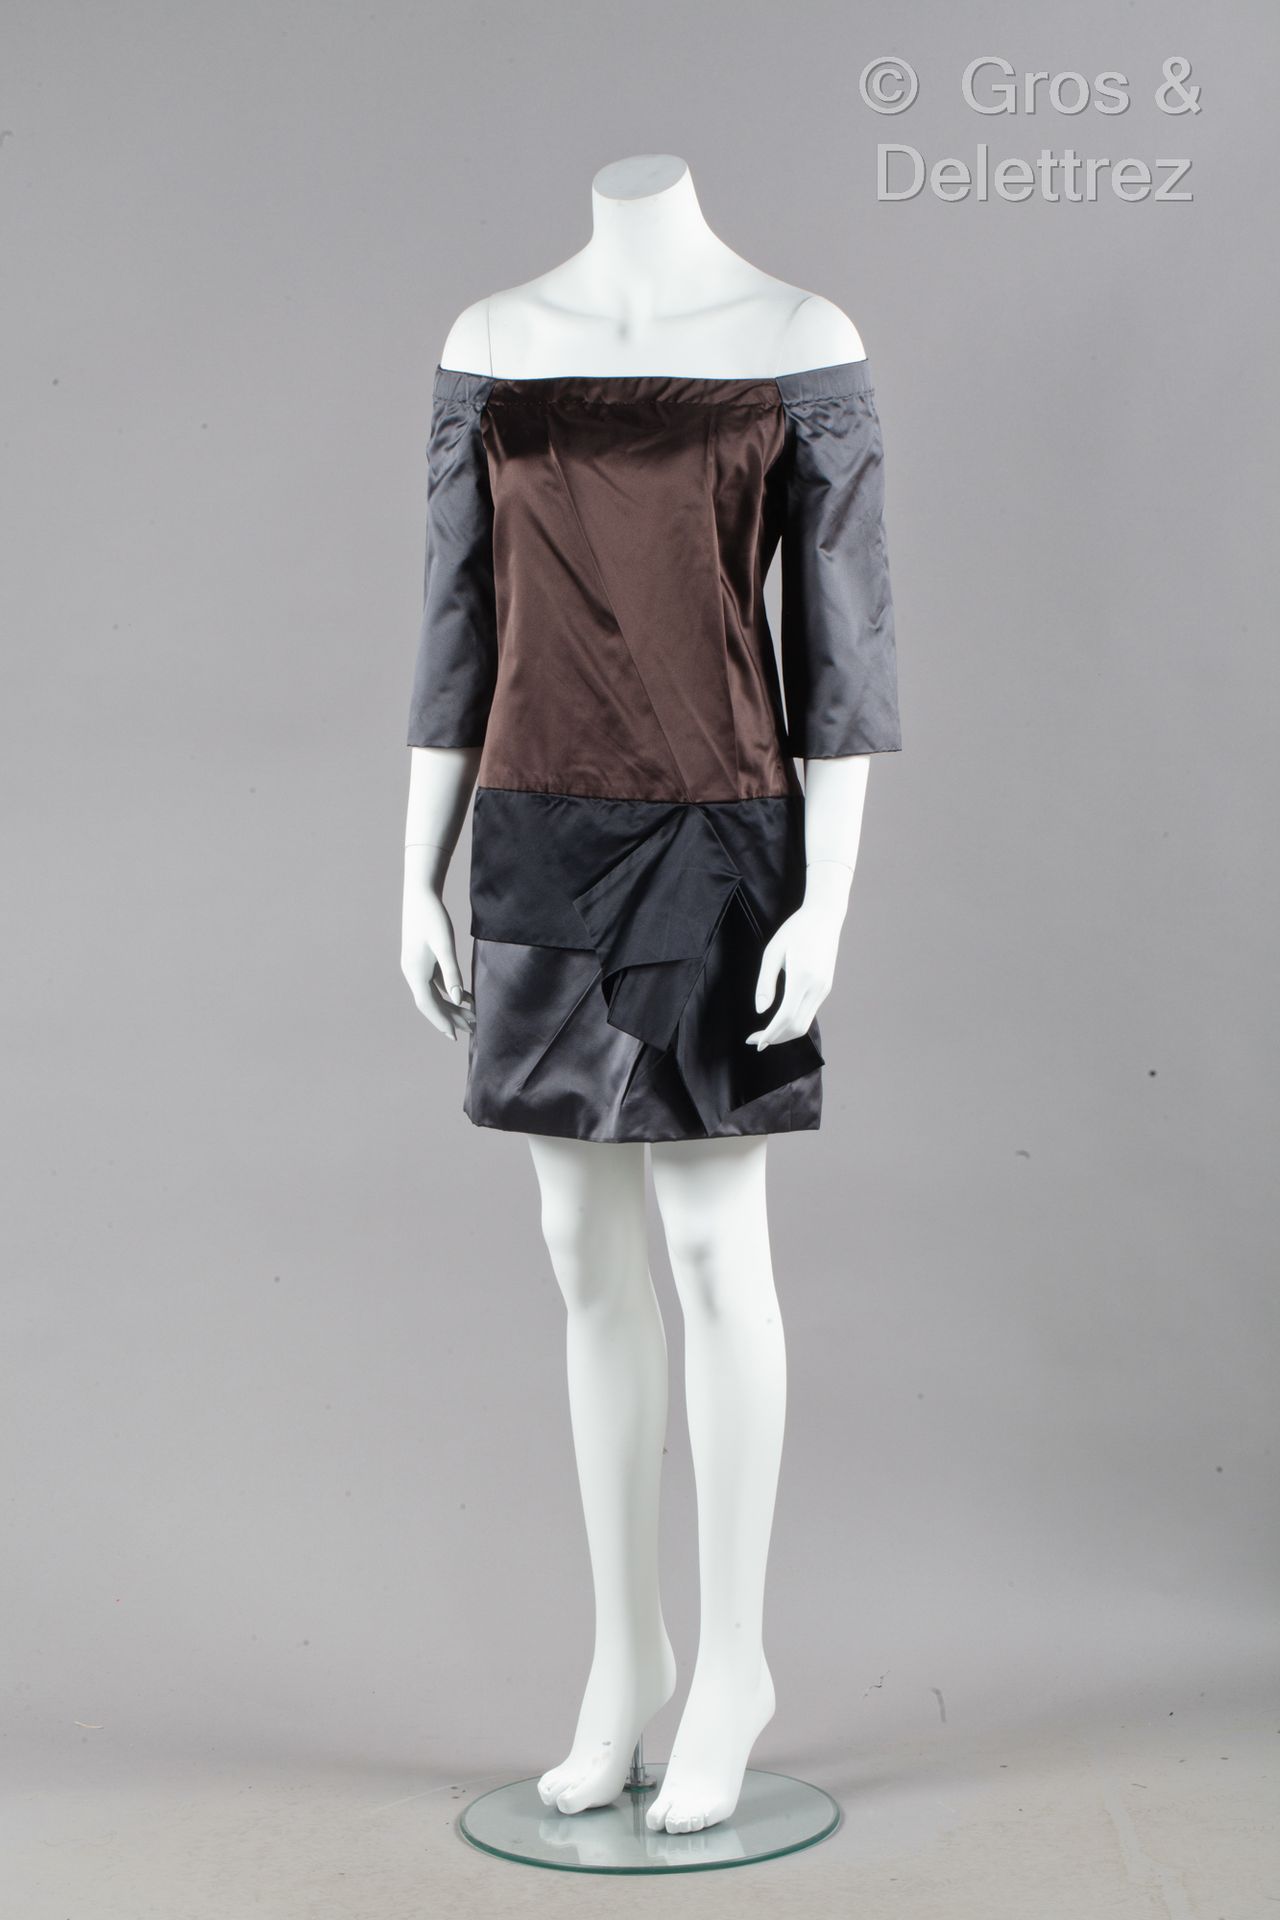 Marc JACOBS Ready-to-wear collection Fall / Winter 2007-2008
Mini-dress in grey,&hellip;